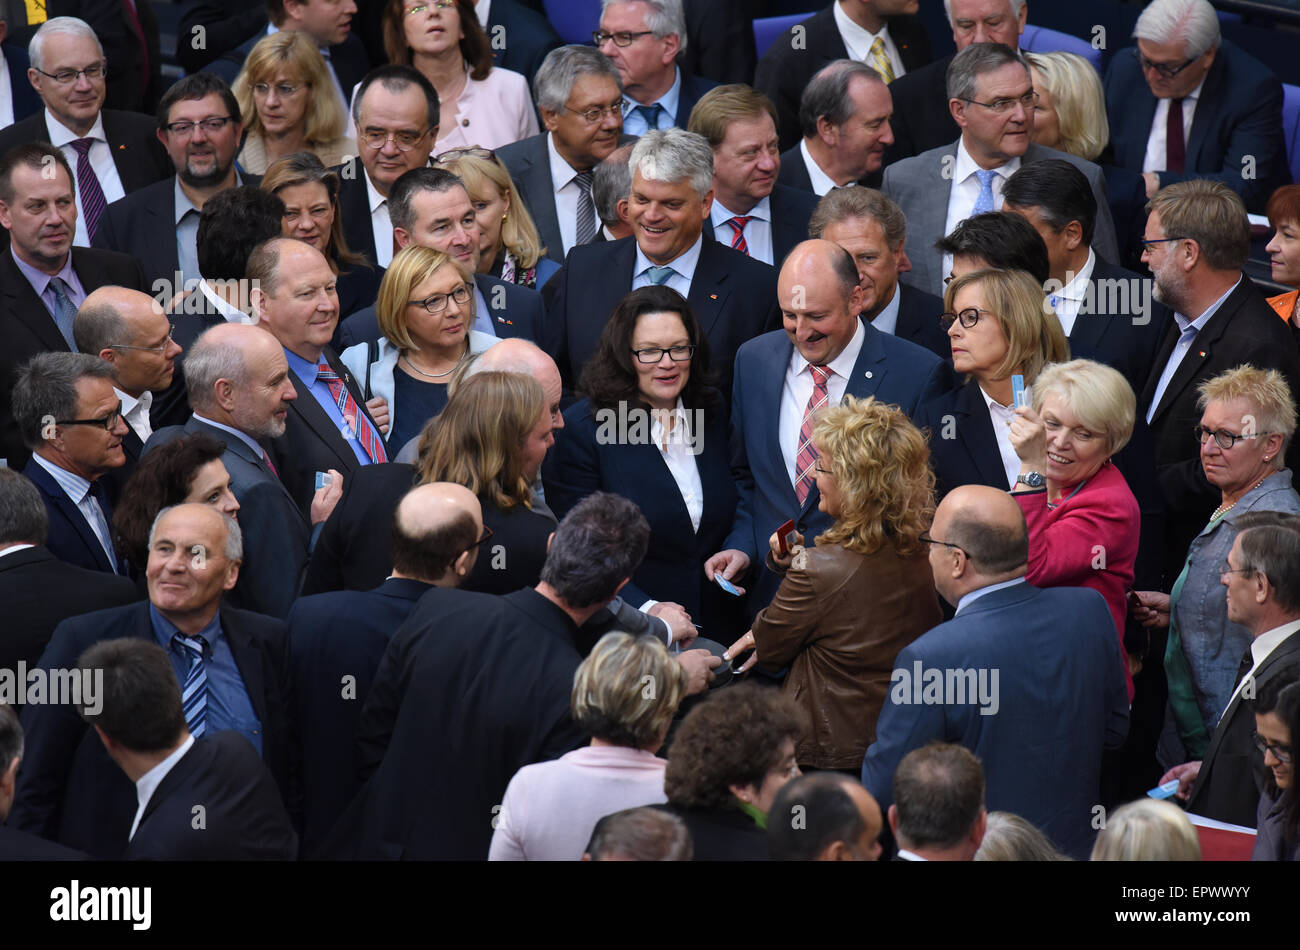 Berlin, Germany. 22nd May, 2015. German Minister of Labour and Social Affairs Andrea Nahles (SPD, C) and other members of parliament cast their ballots on the 'Tarifeinheit' (lit. unity of wages) bill during a Bundestag session in Berlin, Germany, 22 May 2015. Photo: Rainer Jensen/dpa/Alamy Live News Stock Photo